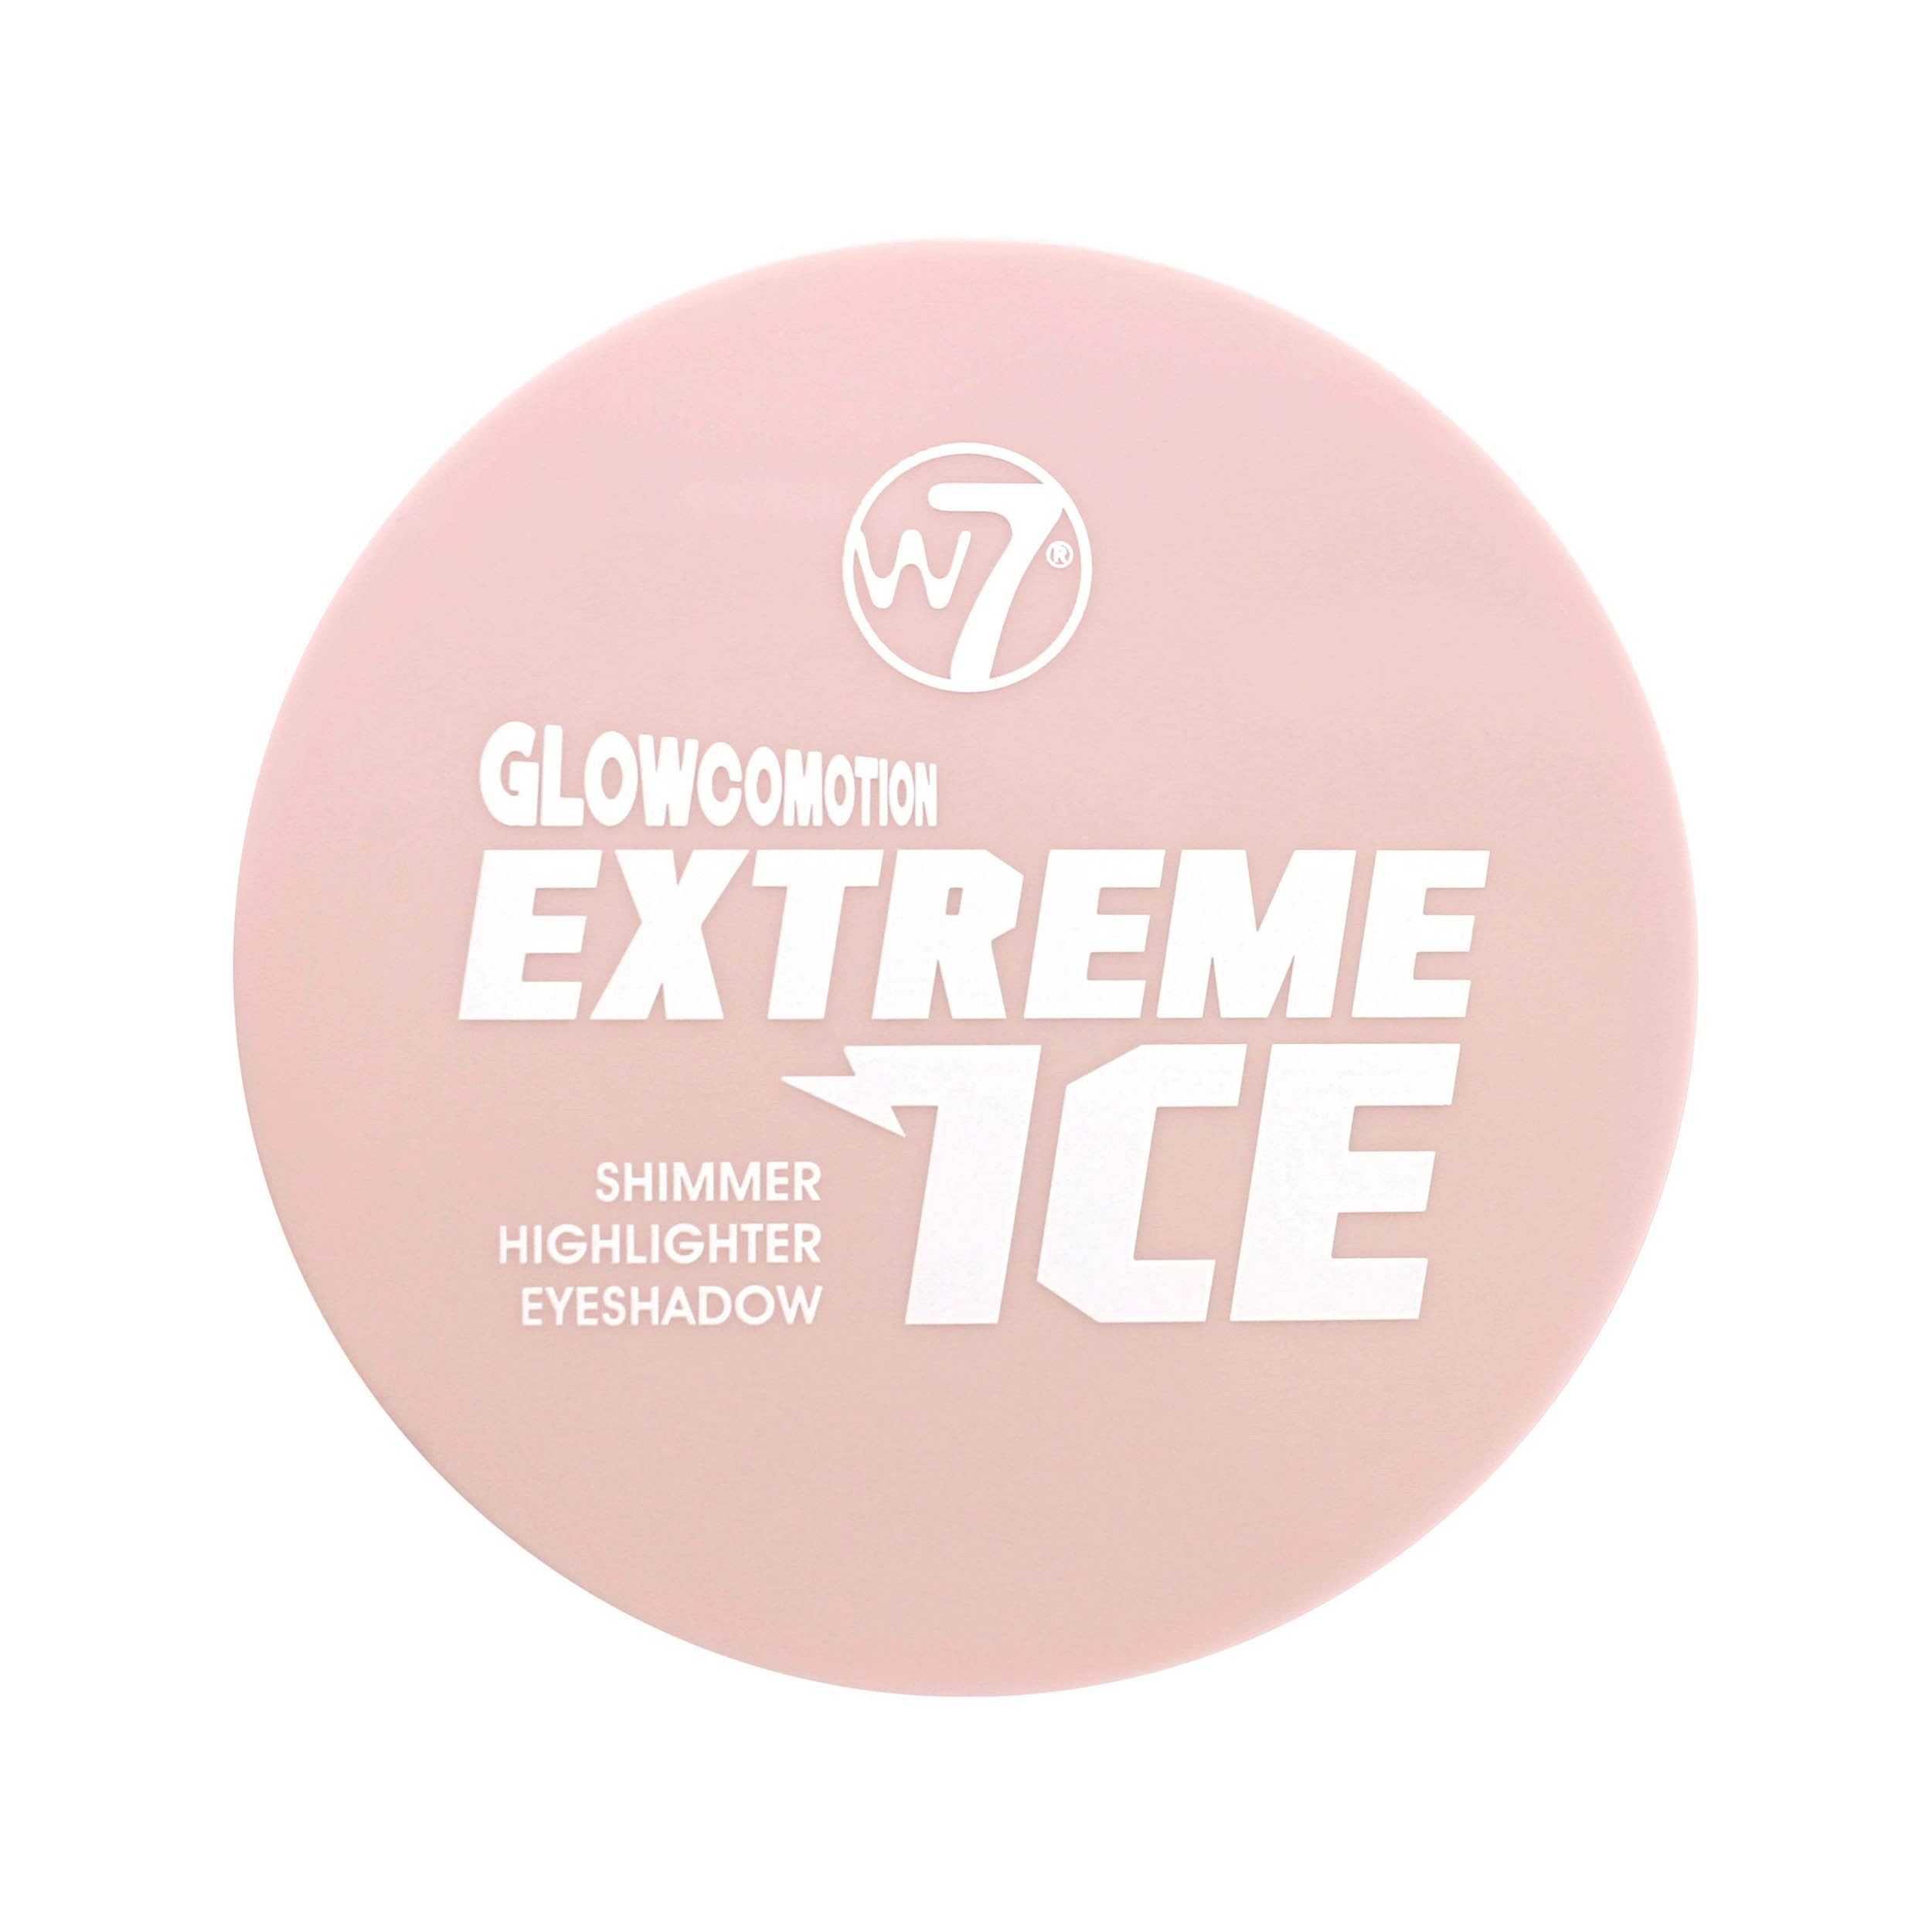 Highlighter - Glowcomotion Extreme Ice